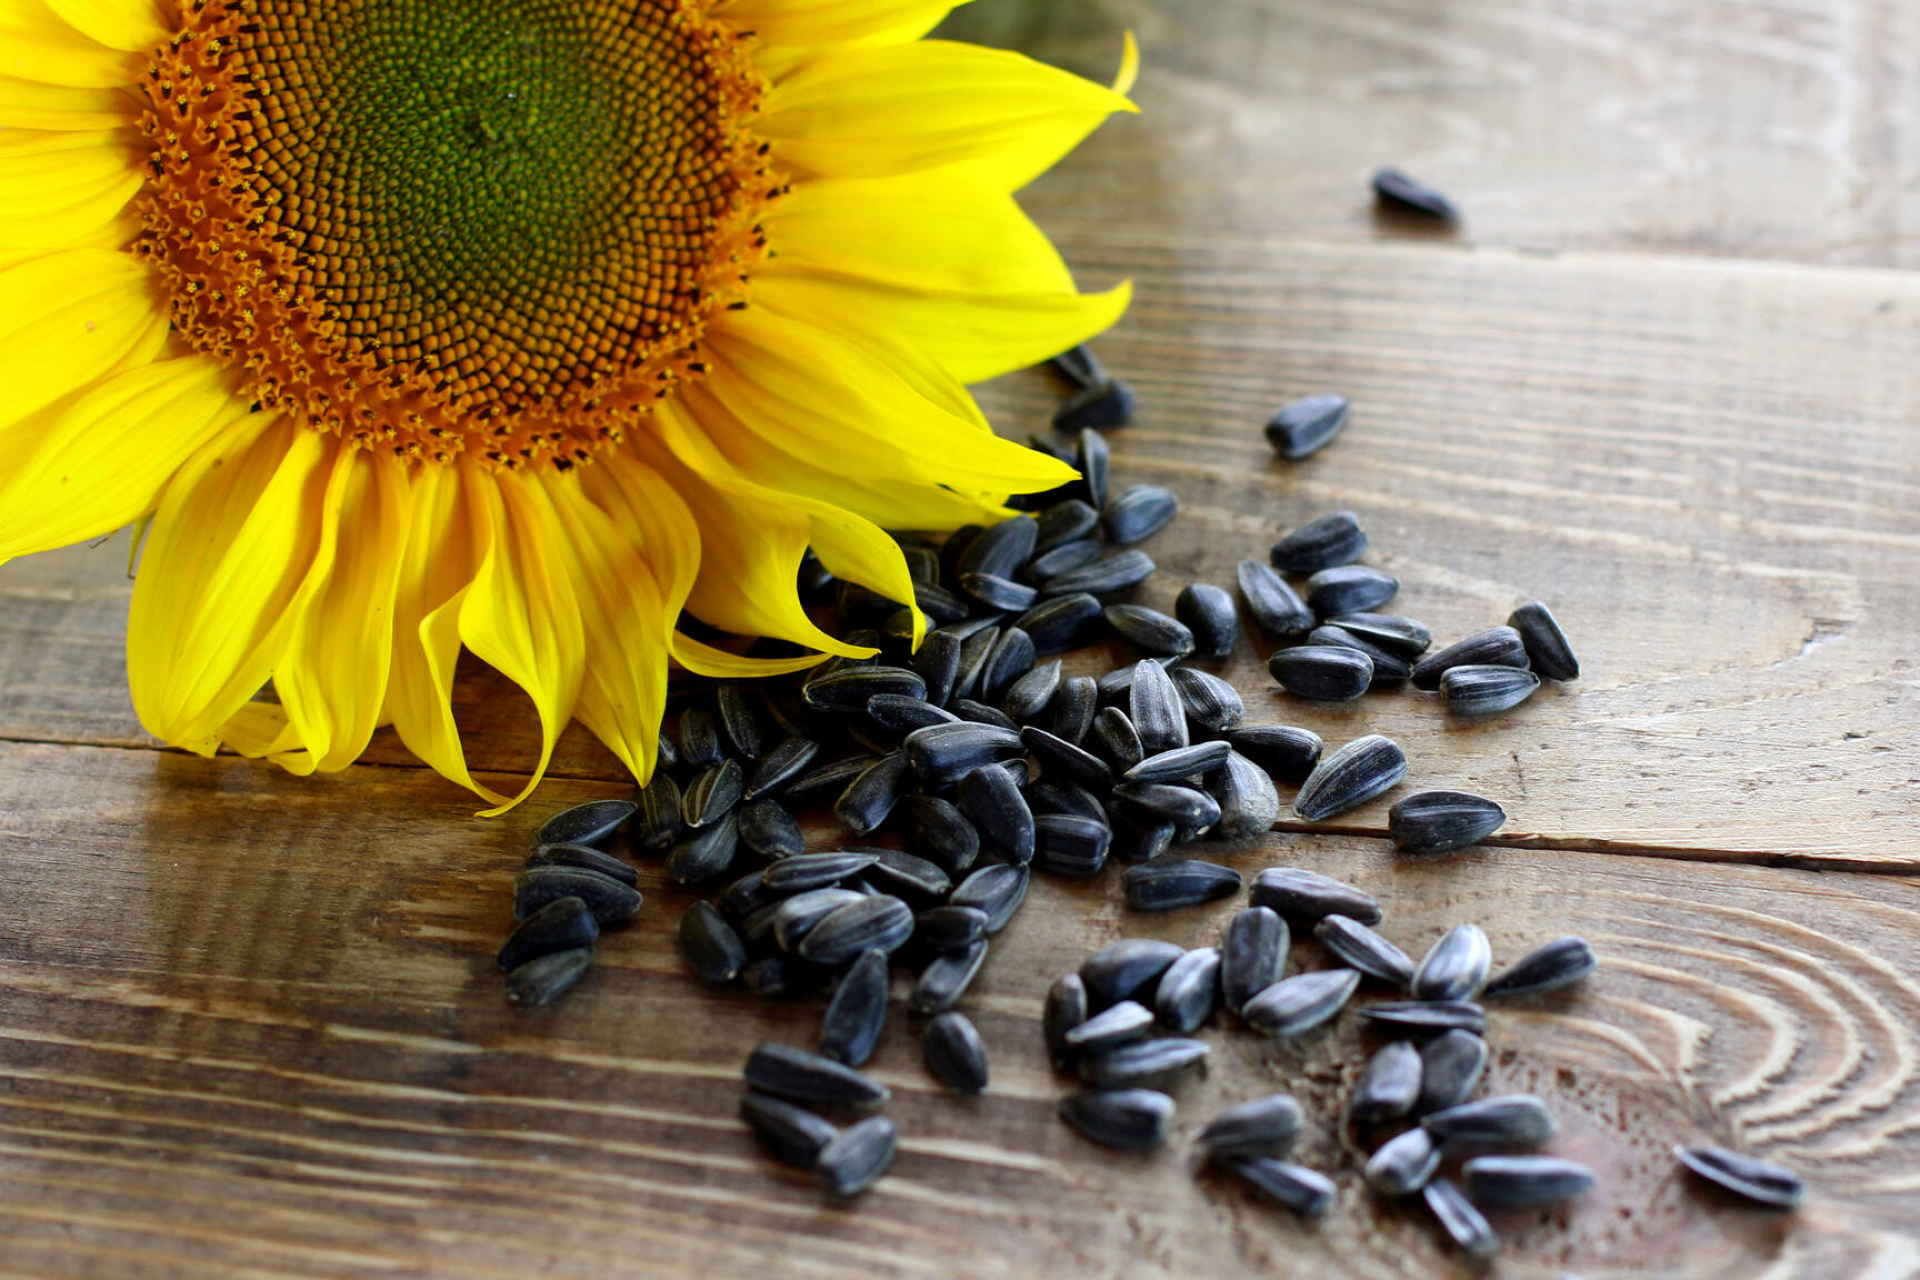 Roasted sunflower seeds image, Free stock photo, Crunchy delight, Creative commons license, 1920x1280 HD Desktop